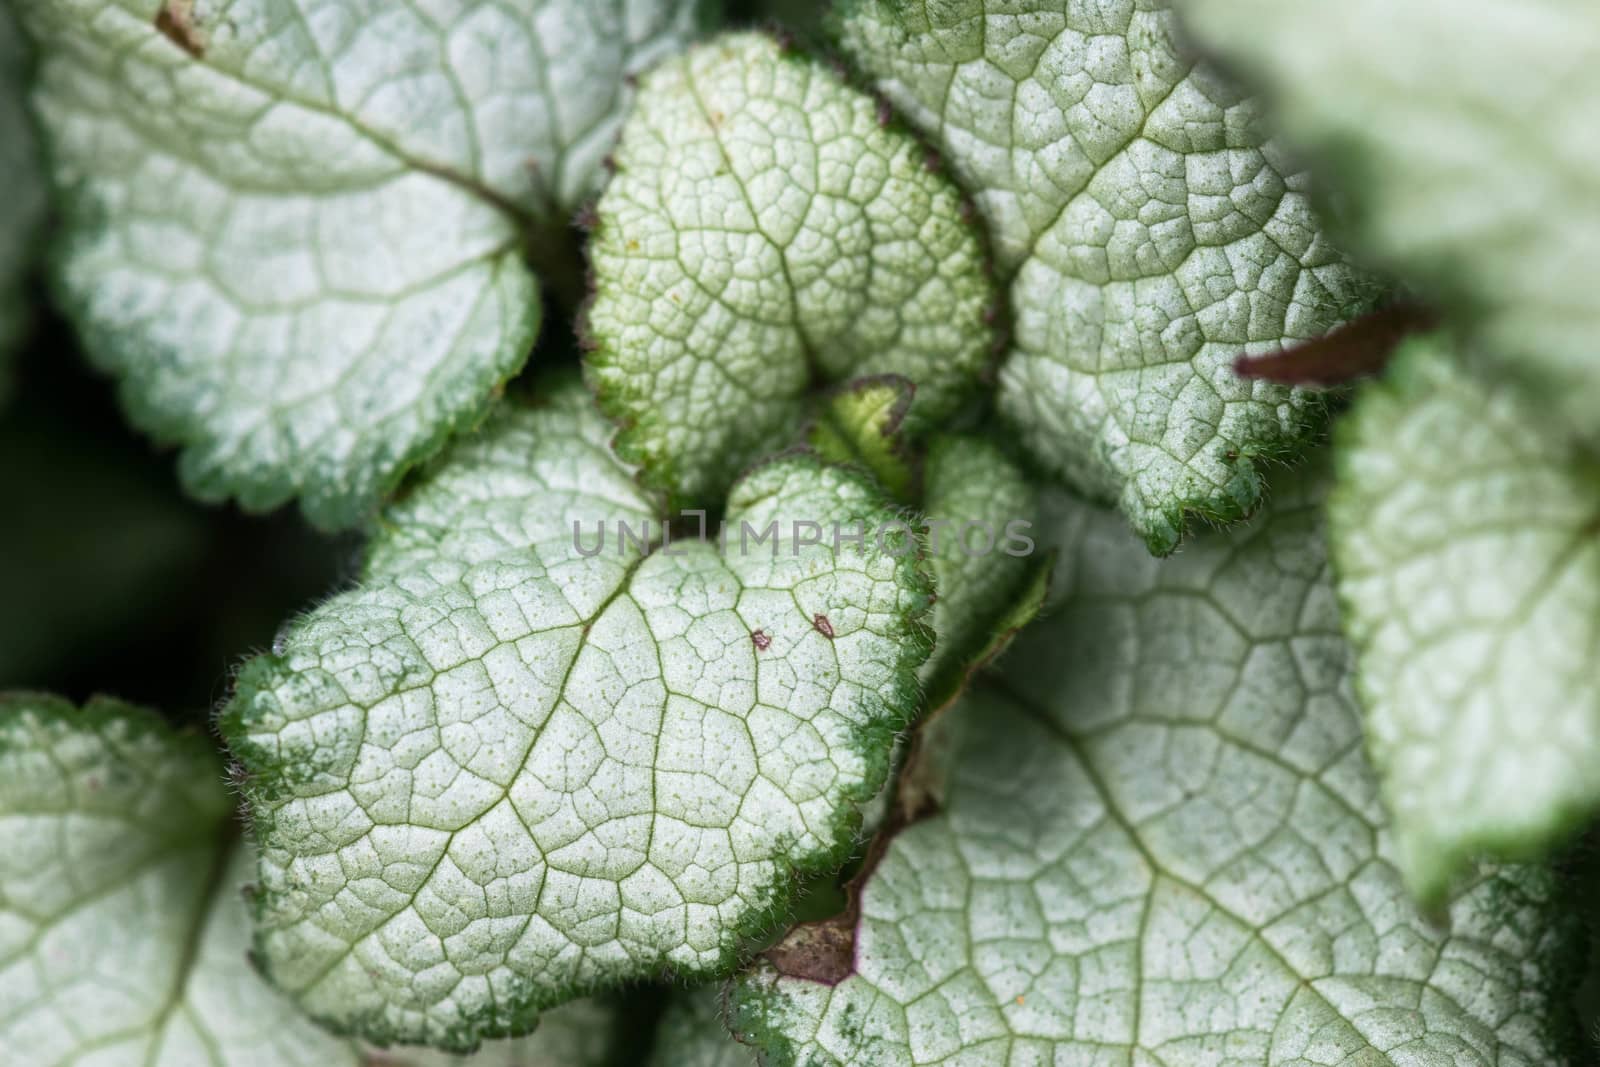 The distinctive silver and green leaves of Brunnera Macrophylla, an outdoor plant also known as Siberian Bugloss